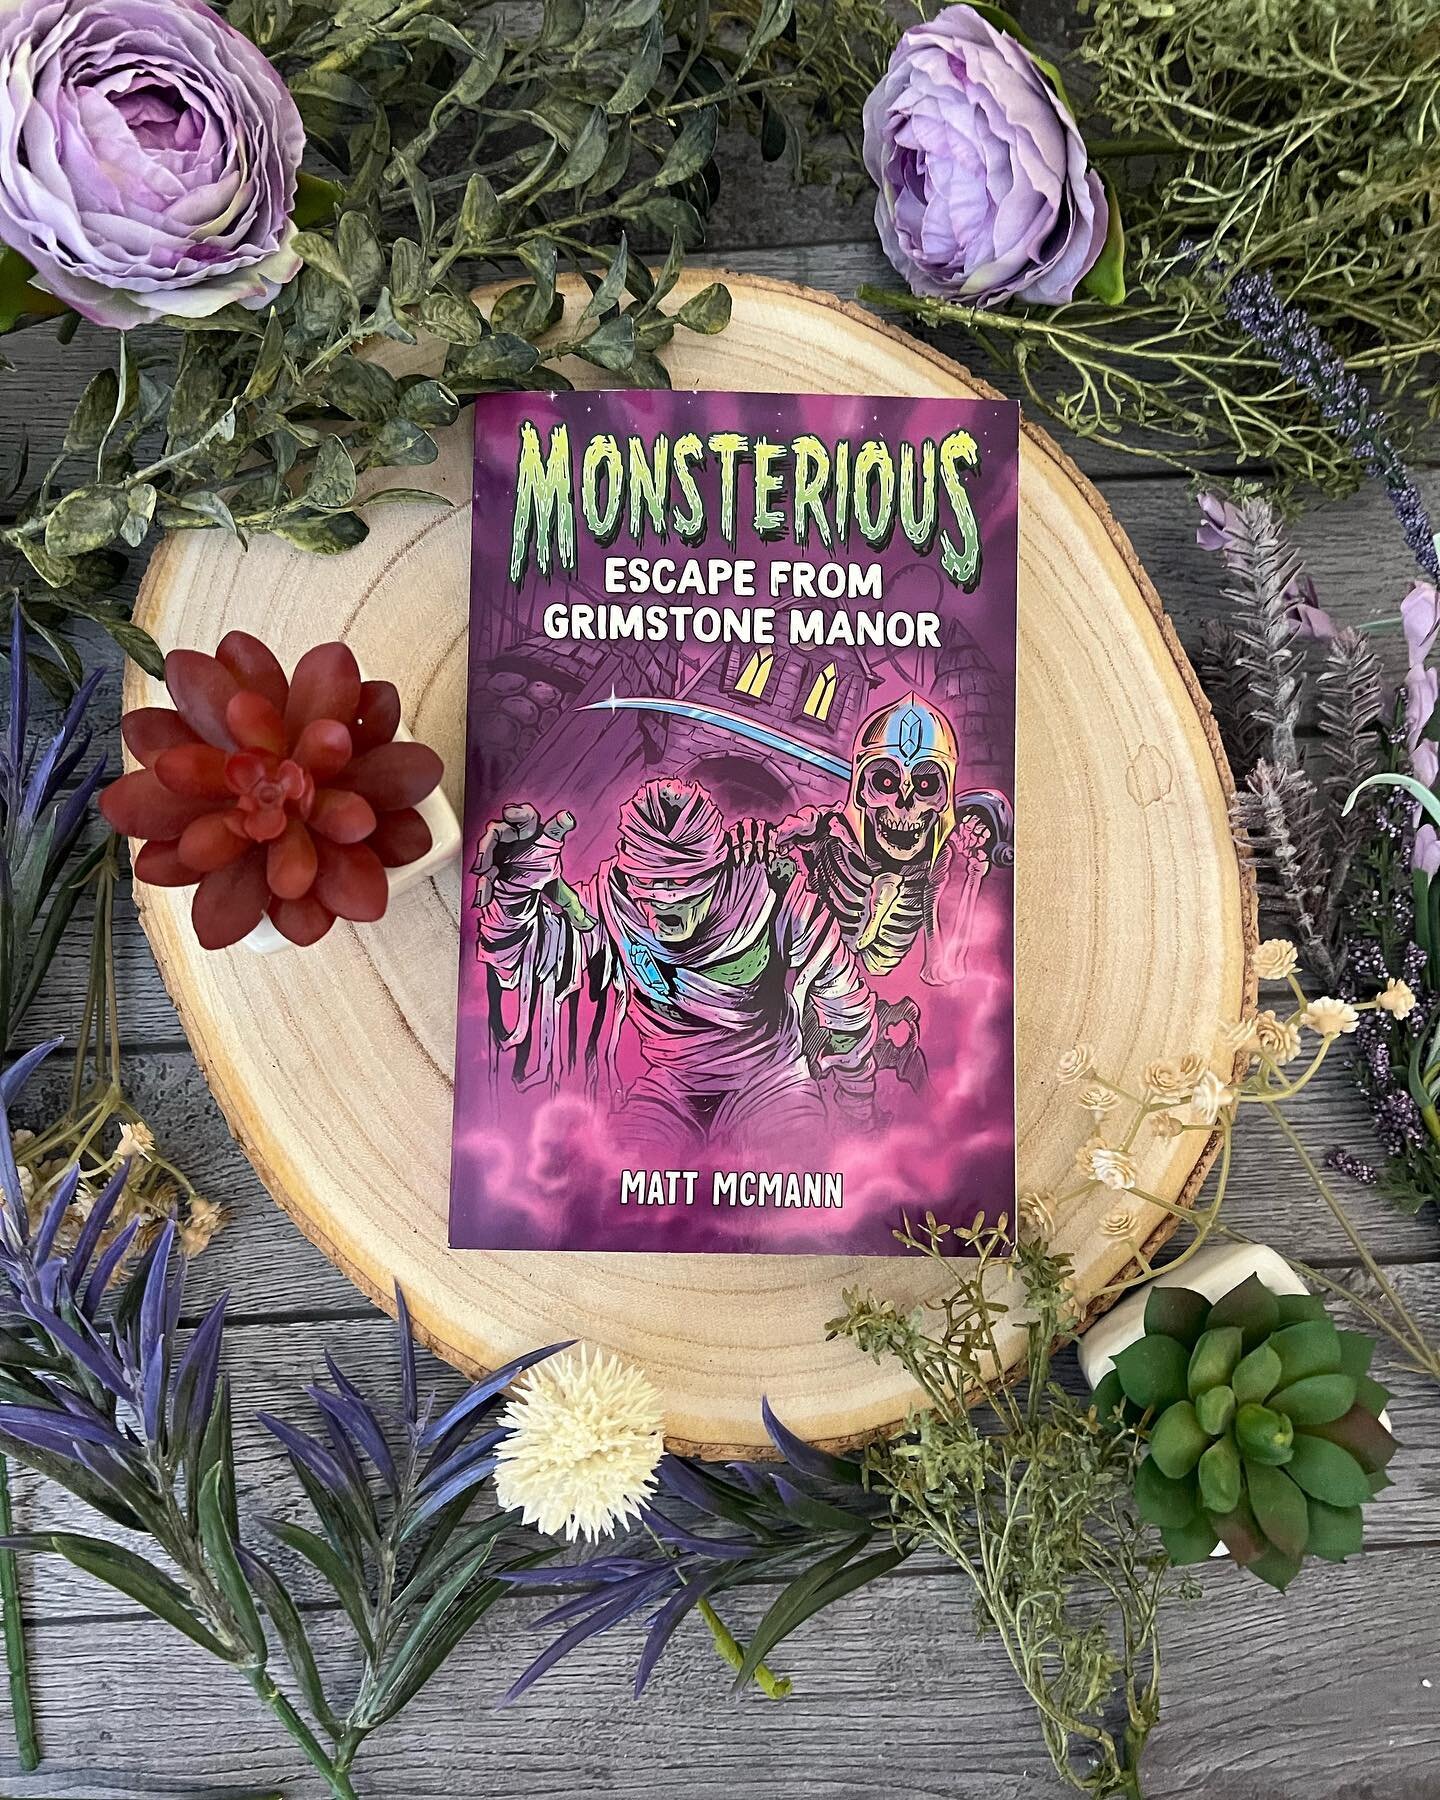 Finished this book yesterday in one sitting! Such a fun read! ✨

#spookymg #middlegradebooks #monsterious #escapefromgrimstonemanor #mghorror